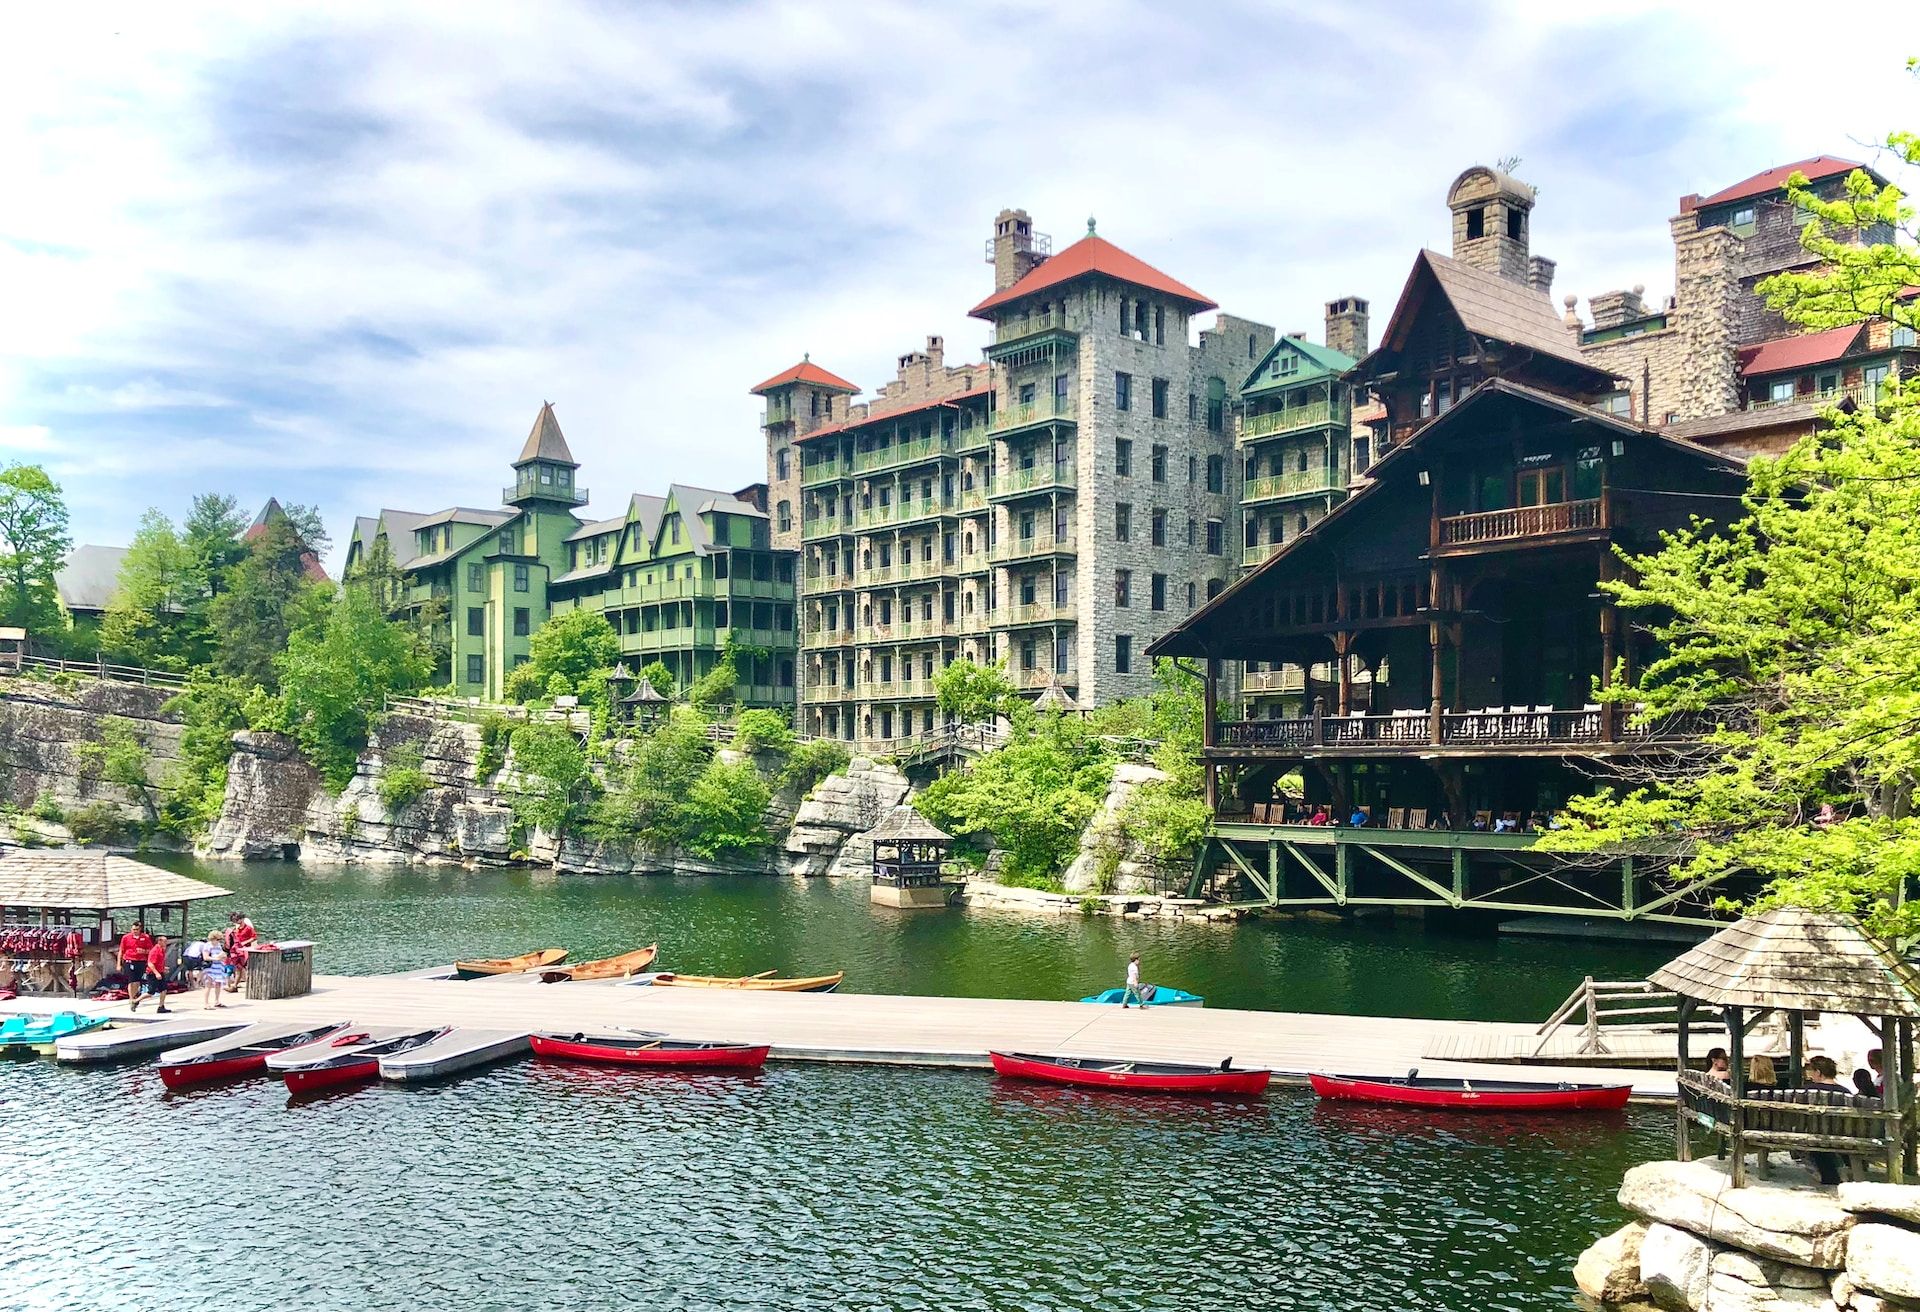 Mohonk Road in New Paltz, New York